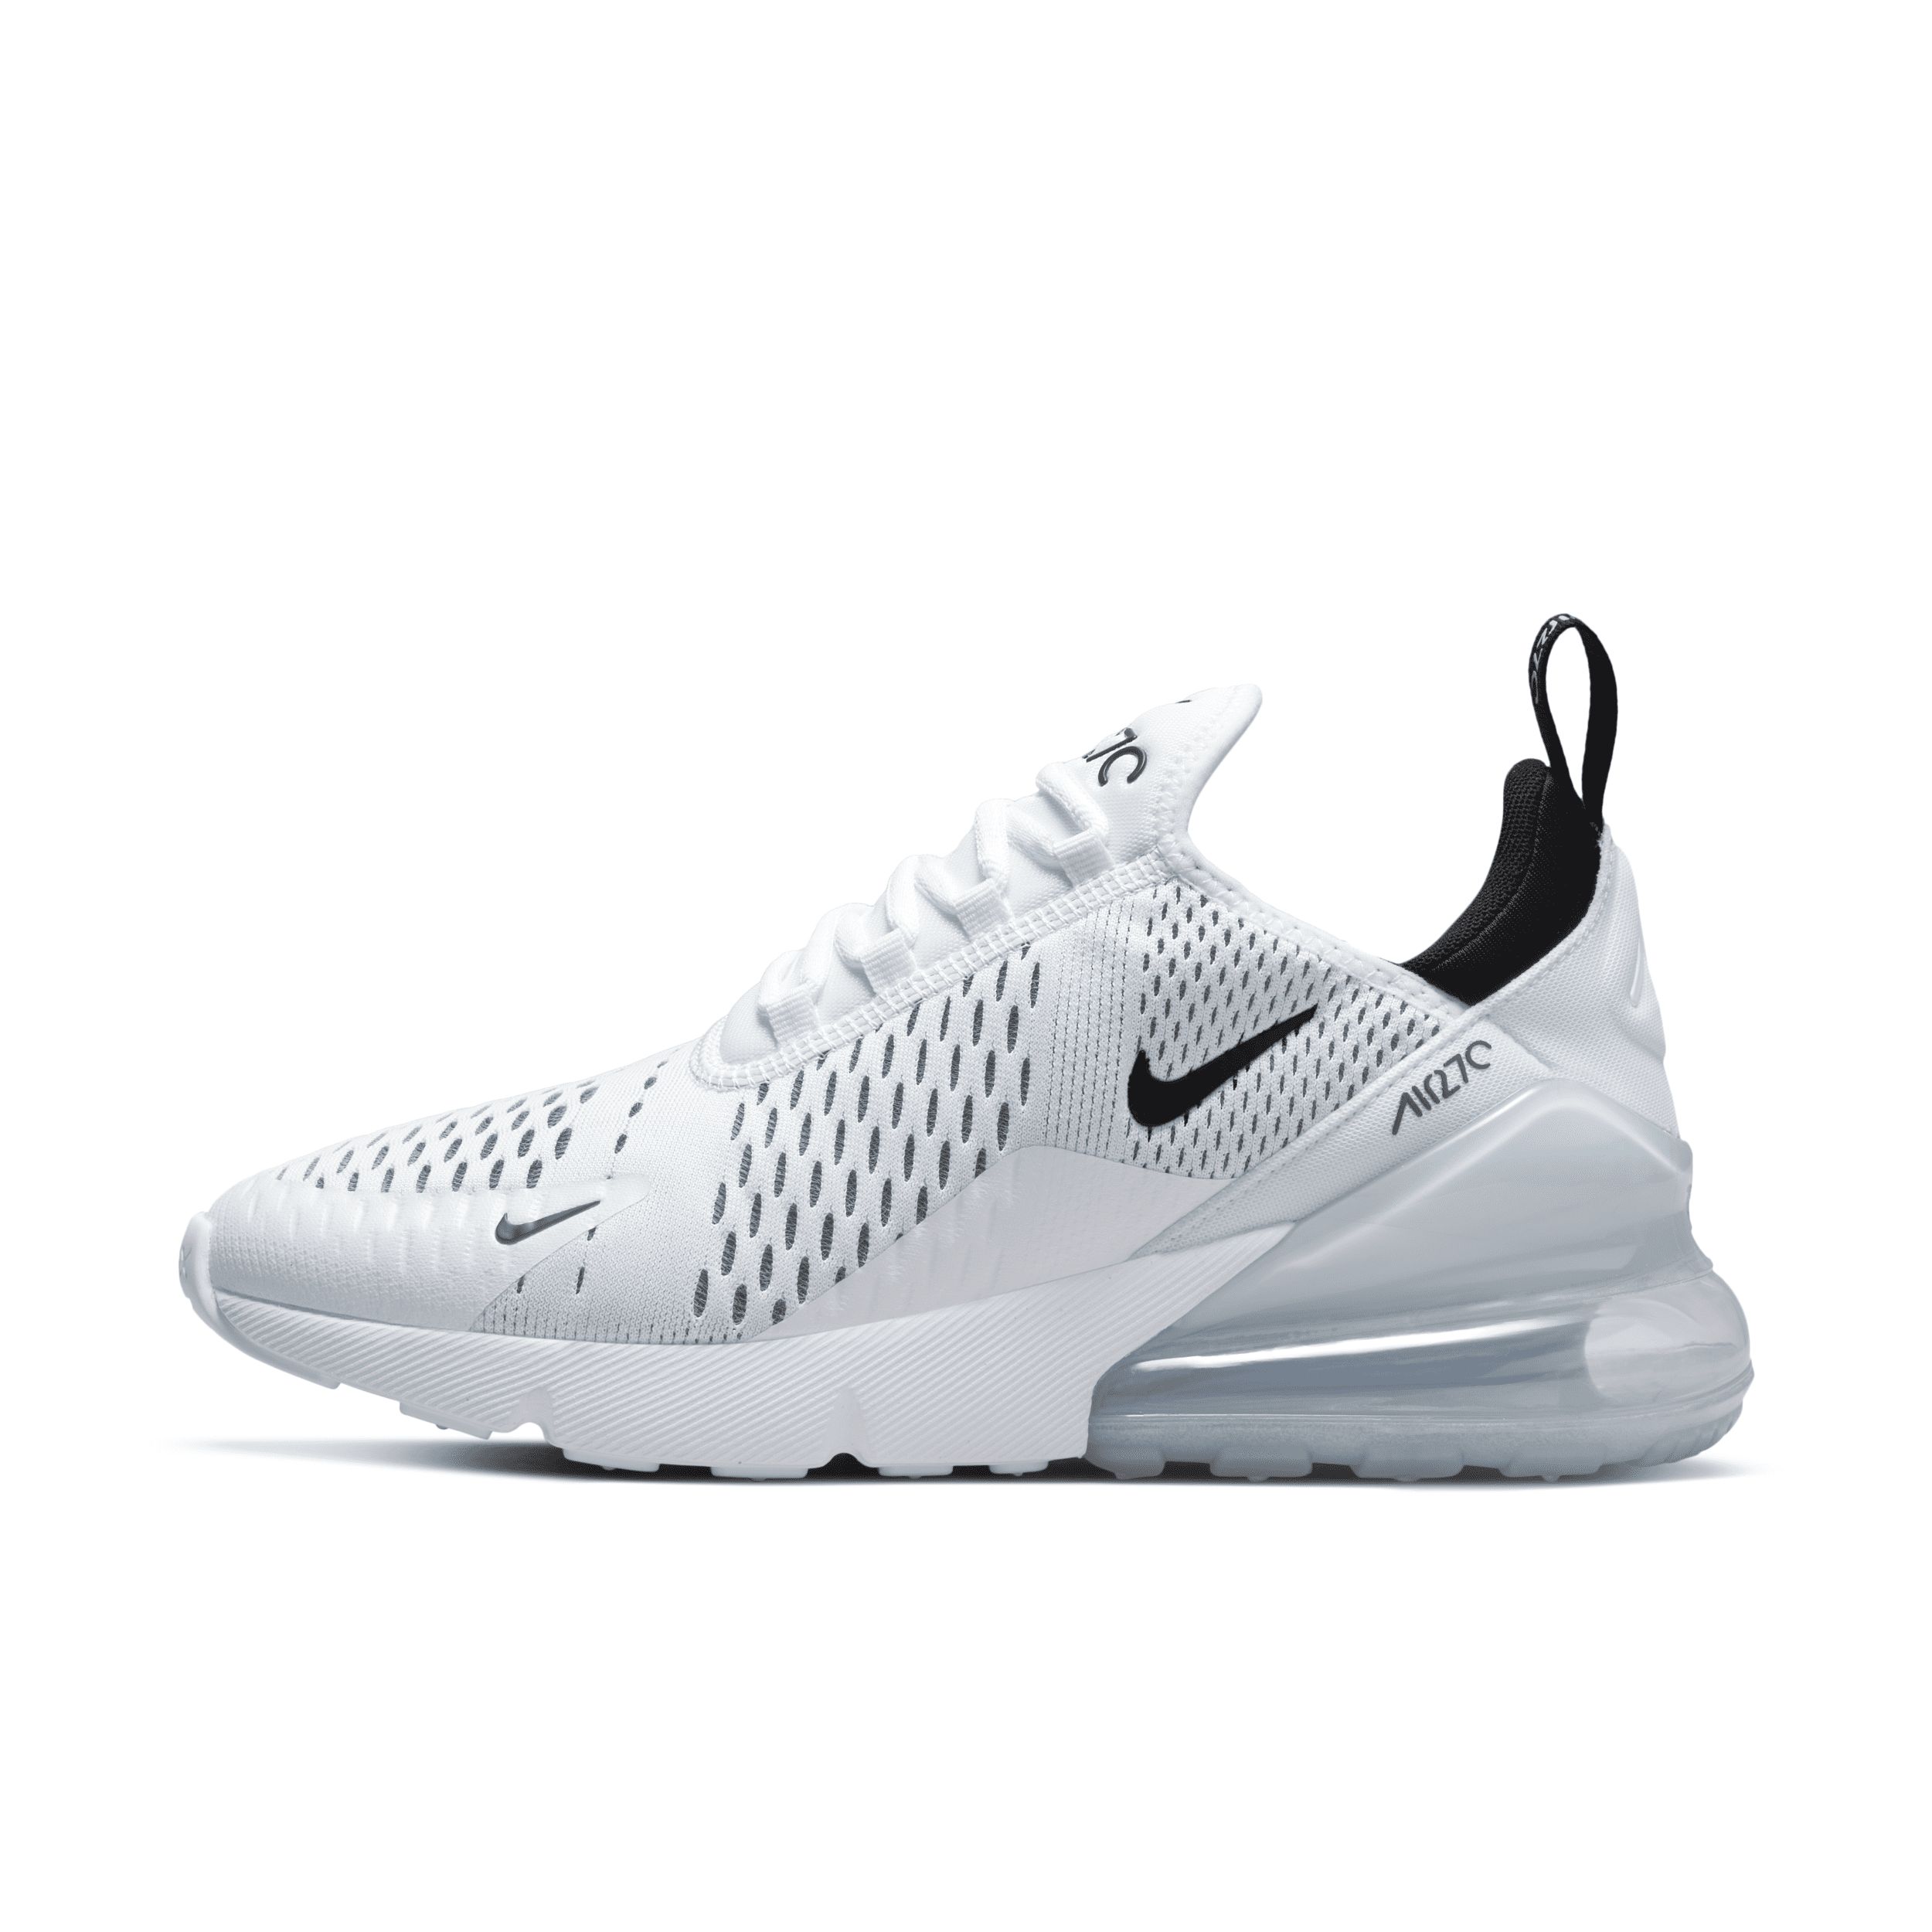 Nike Women's Air Max 270 Shoes in White, Size: 6.5 | AH6789-100 | Nike (US)